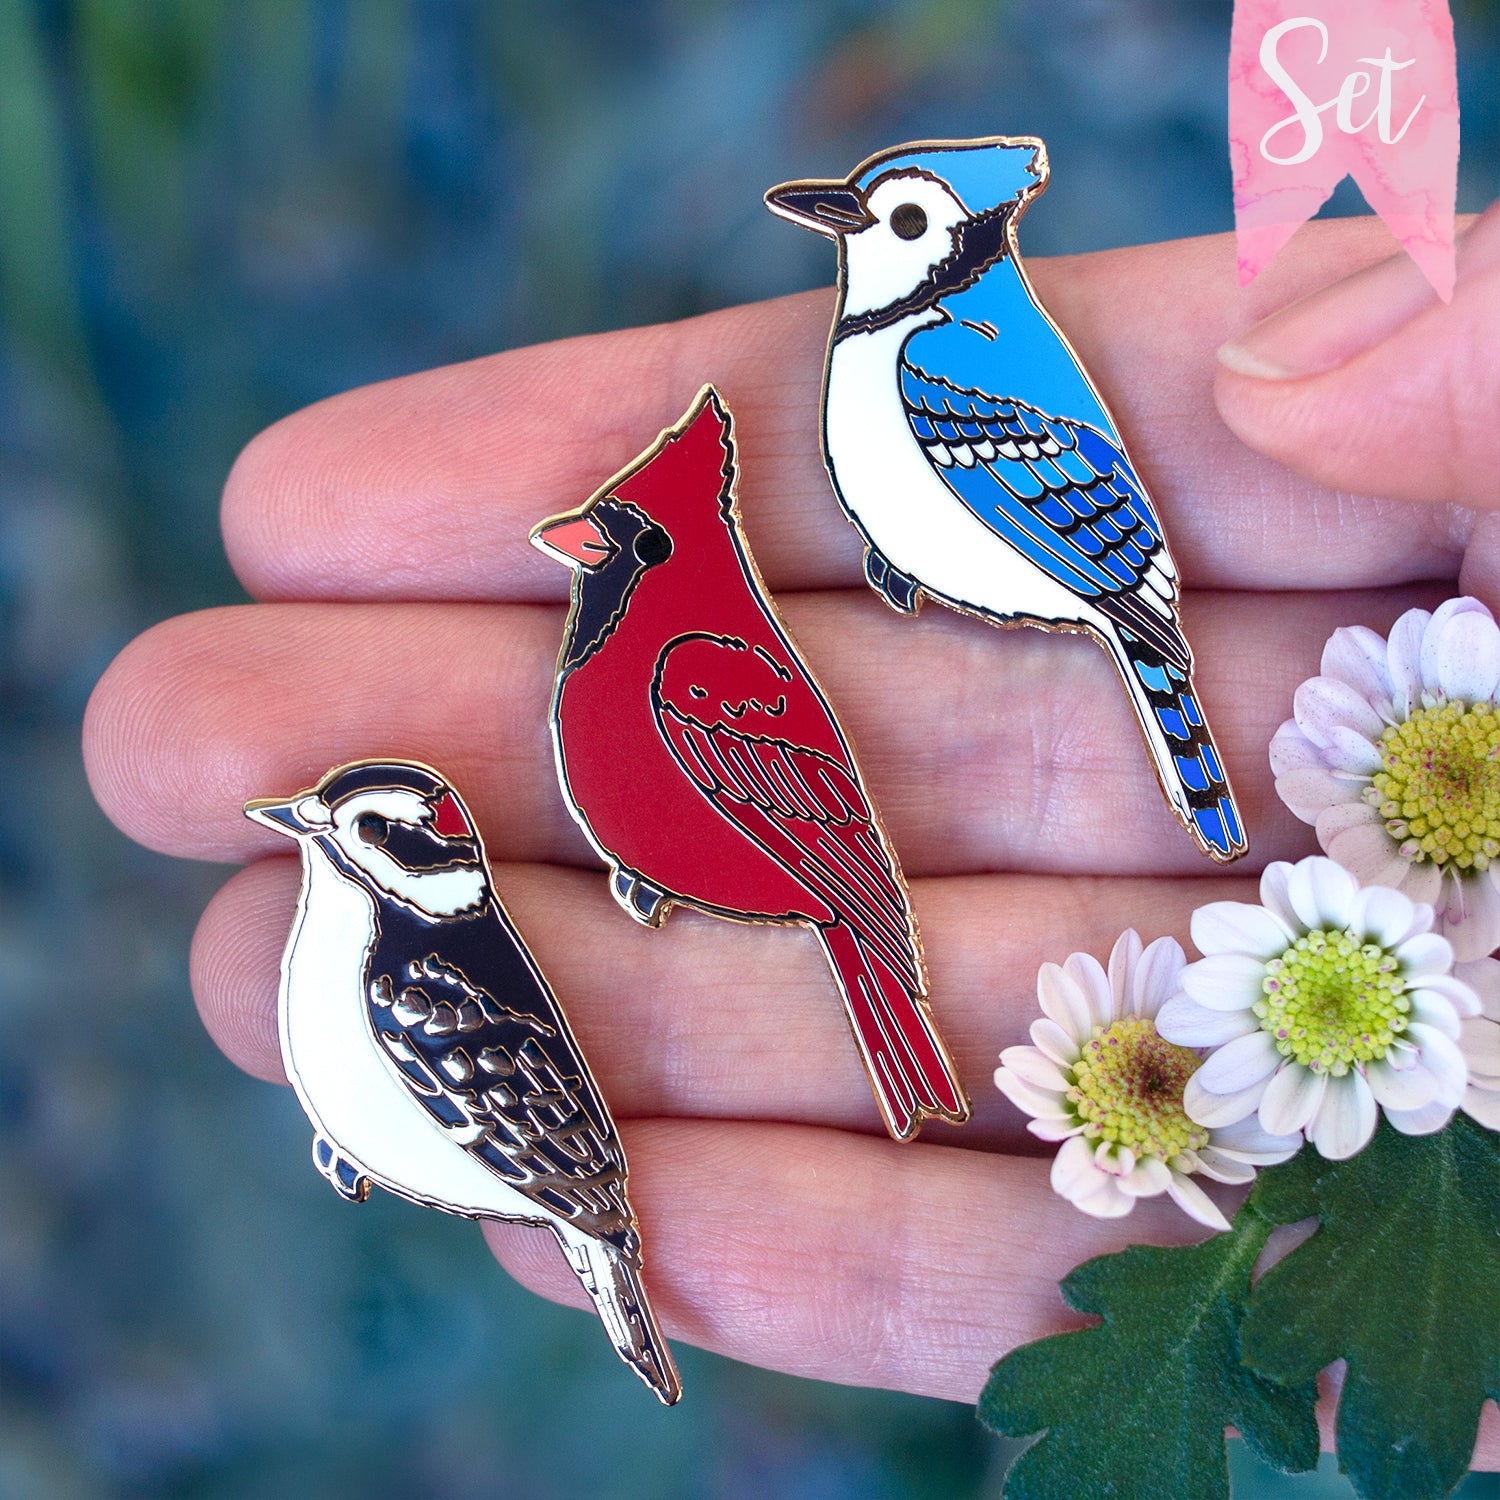 Cardinal, Blue Jay & Woodpecker Enamel Pin Set – Botanical Bright - Add a  Little Beauty to Your Everyday